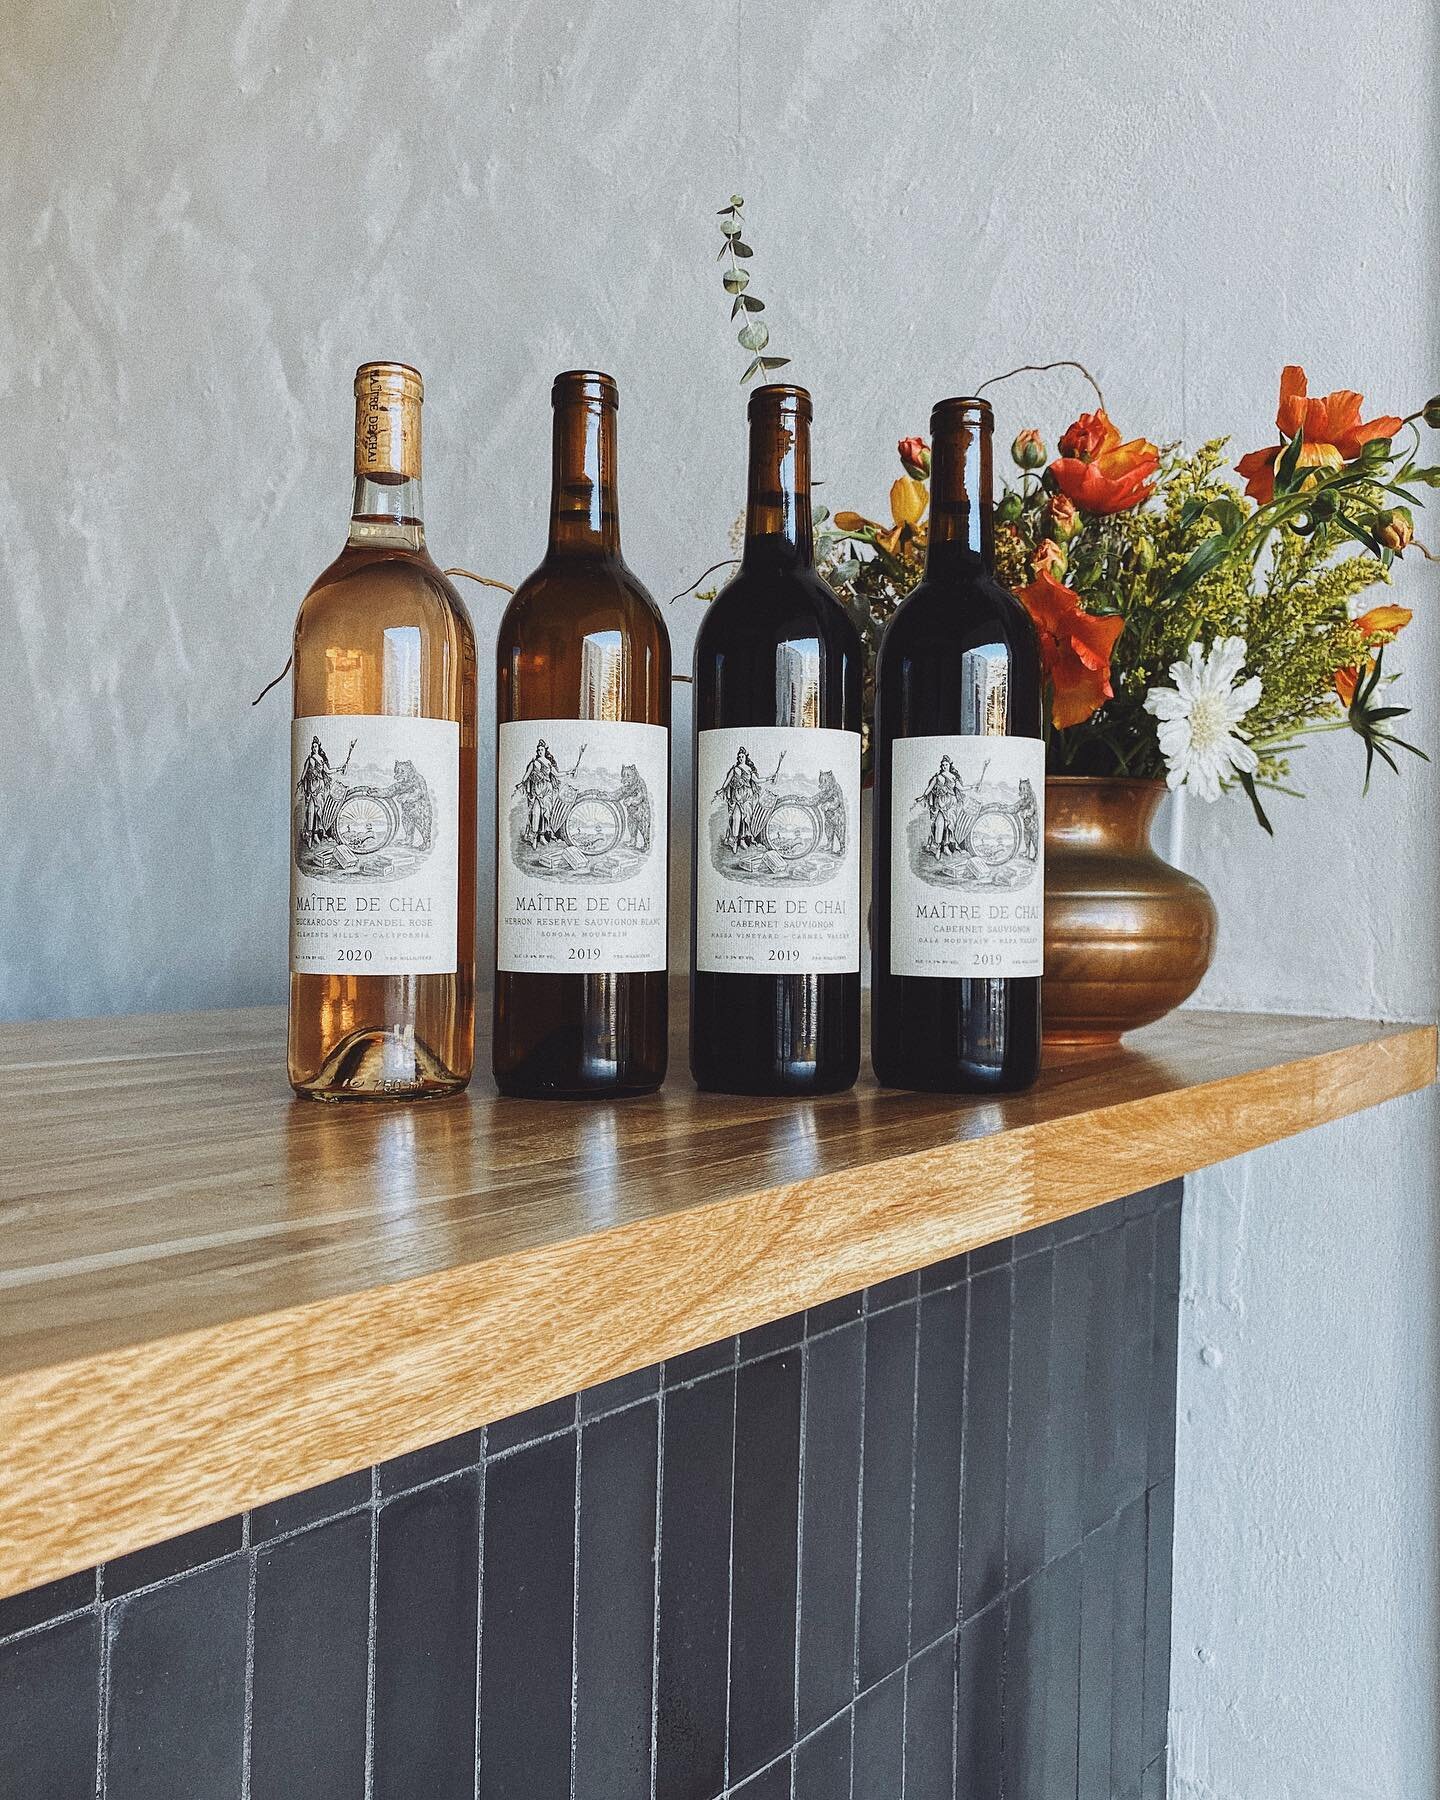 🔆 NEW WINES - COMING SOON 🔆

Next week marks the official release of our spring wines &amp; club member shipments. Sign up for our mailing list (link in bio) if you love: mountain terraced + old vine Cabernet, dry/high acid White Zinfandel &amp; sk